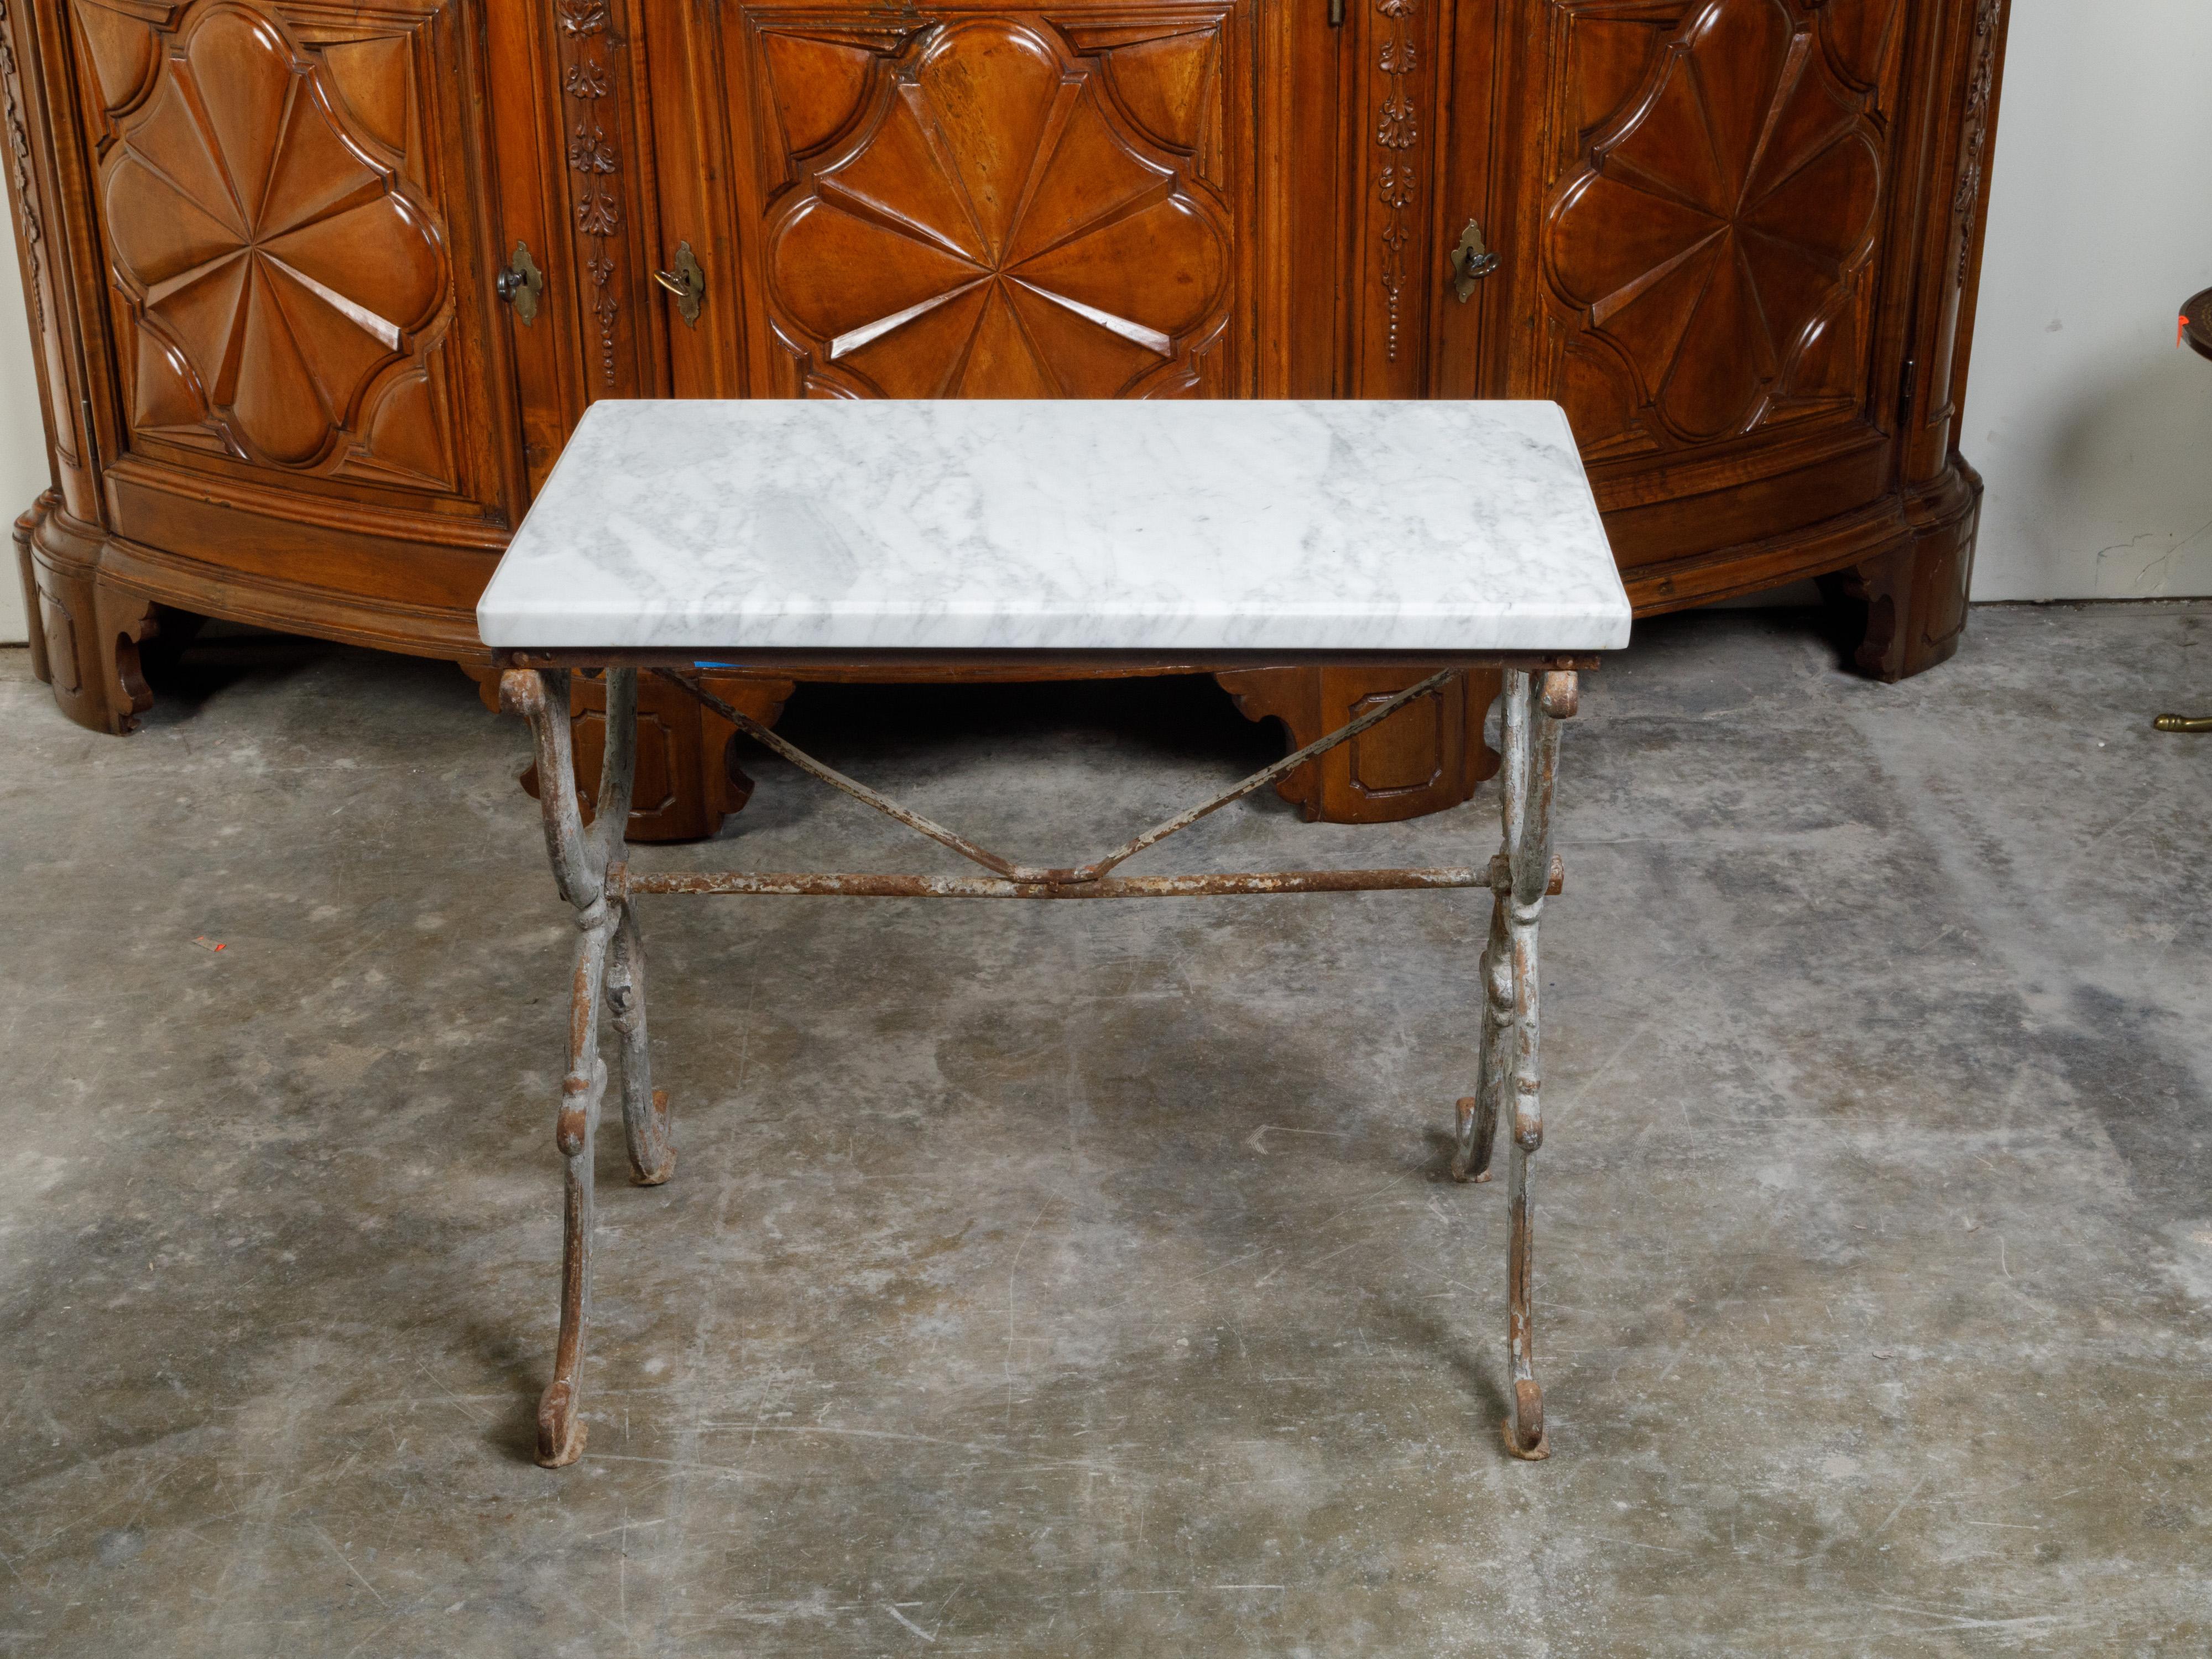 A French iron console table from the 19th century, with white marble top and X-Form base. Created in France during the 19th century, this console table features a rectangular white marble top sitting above an elegant double X-Form base with cross